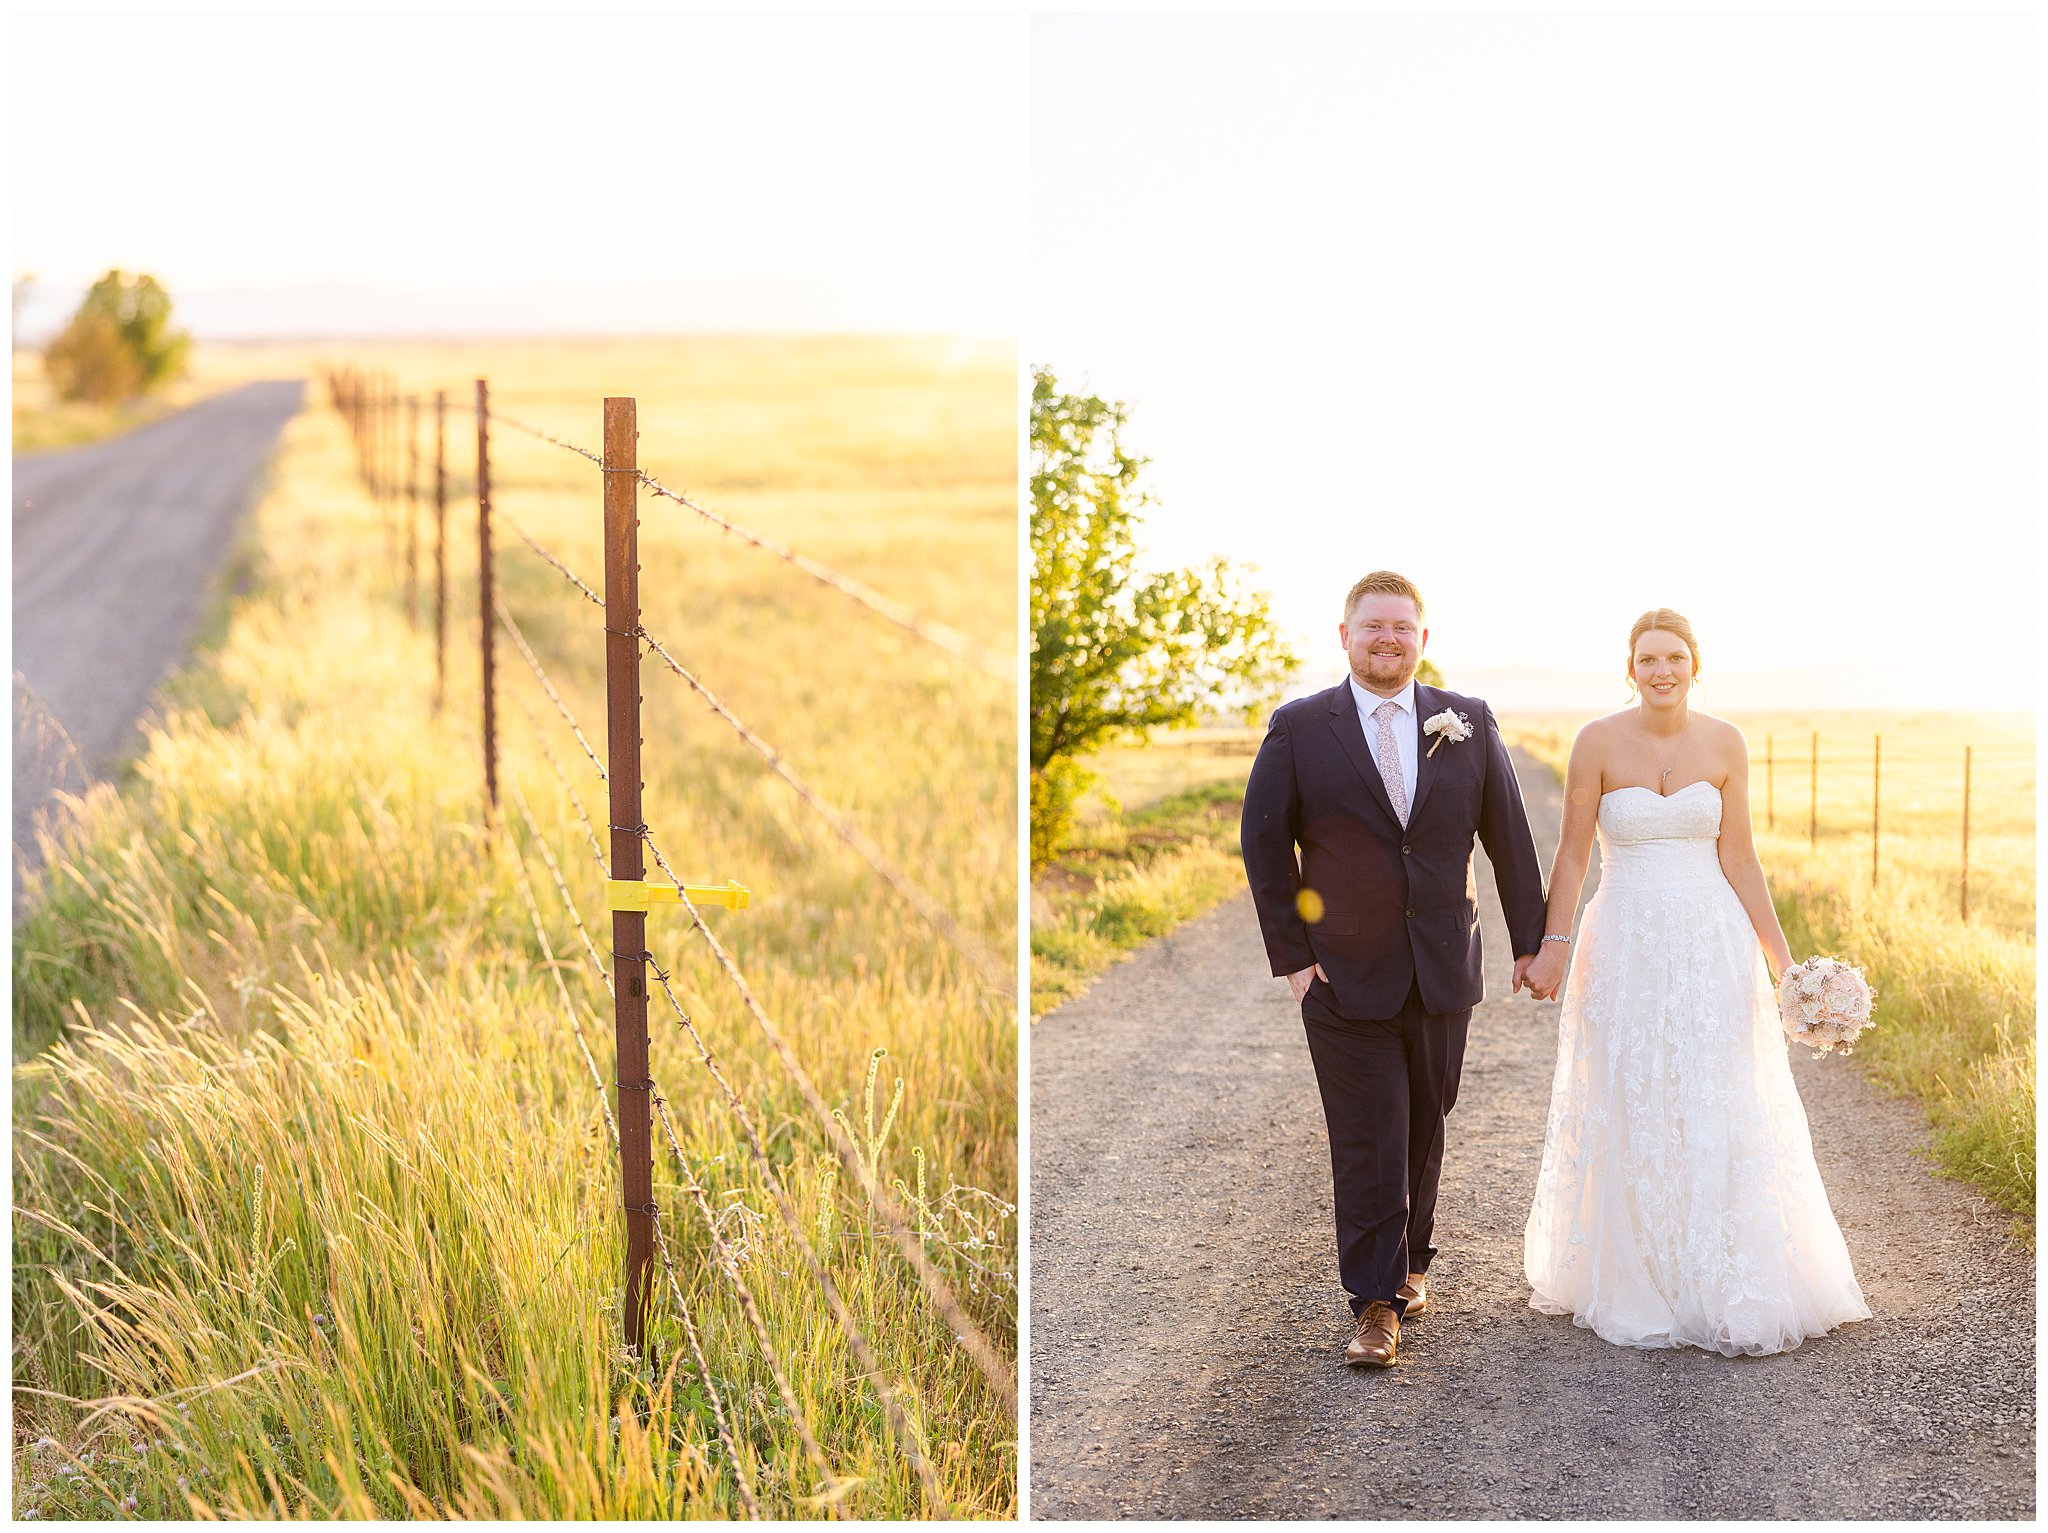 White Ranch Events Wedding Chico CA Spring April Willow Tree Sunset Blush Sage First Look Blue Suit,